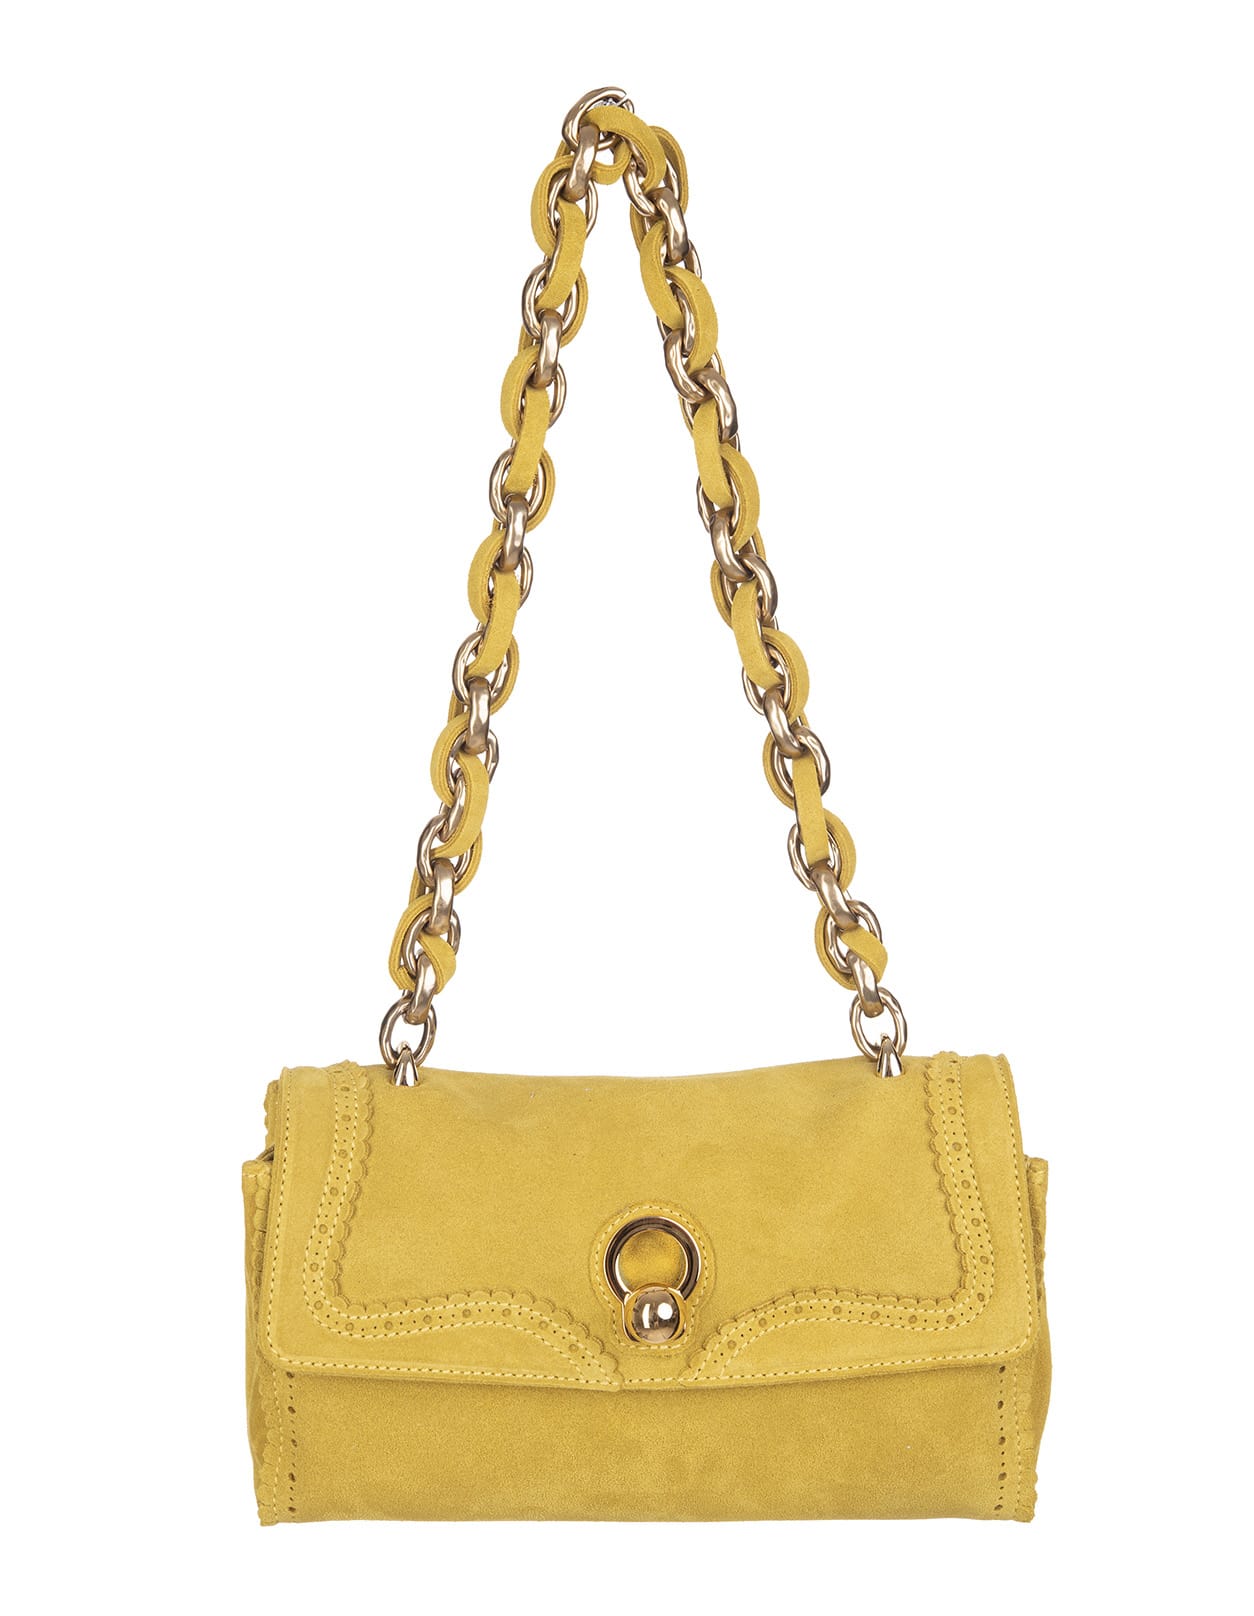 Ermanno Scervino Faubourg Baguette Bag In Yellow Suede